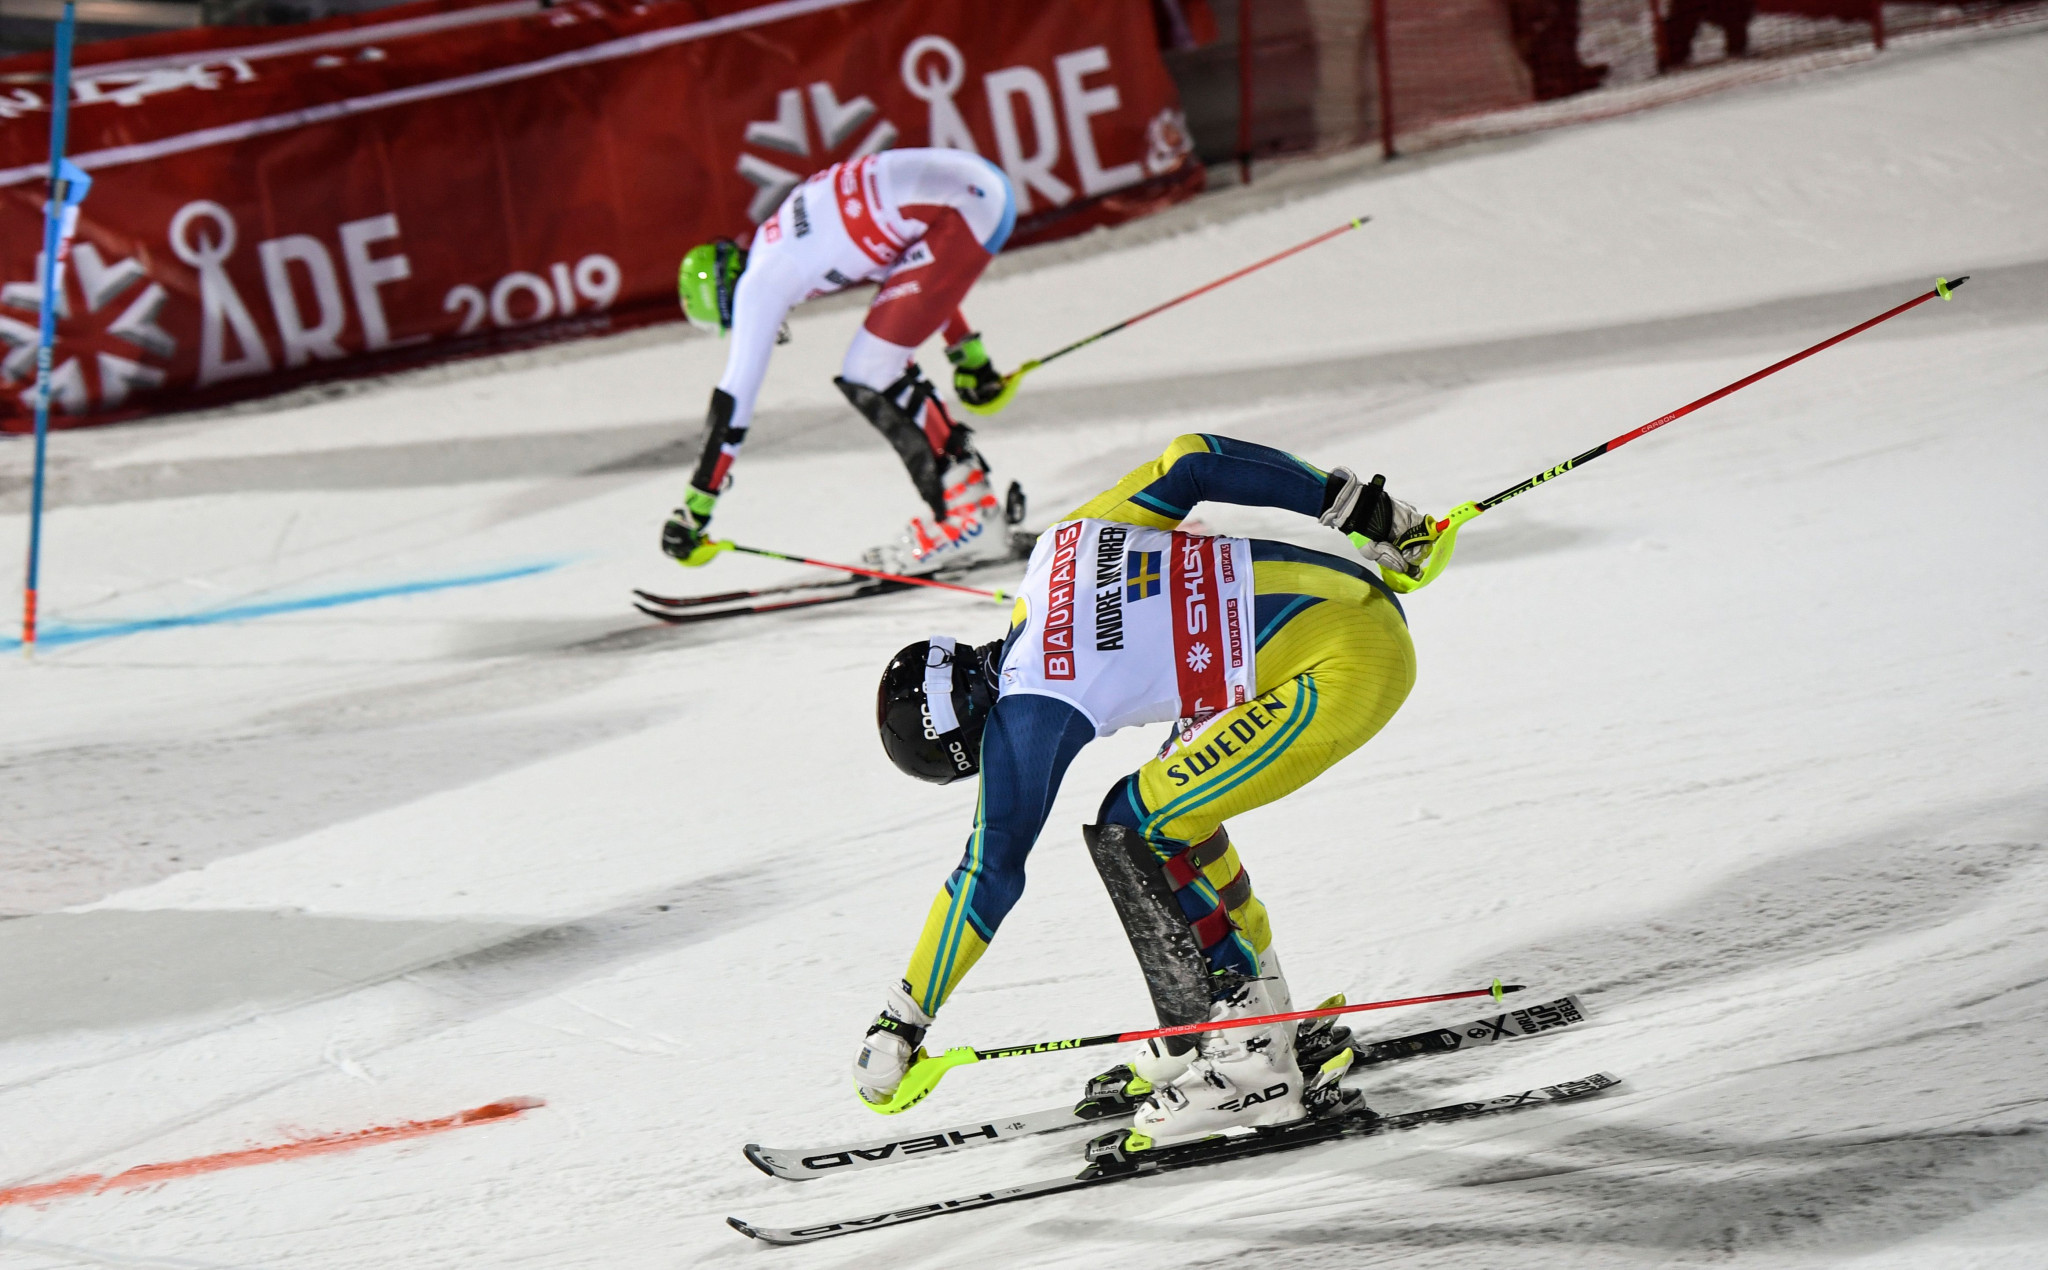 A new World Cup event for parallel Alpine skiing will be added from 2020-2021 ©FIS